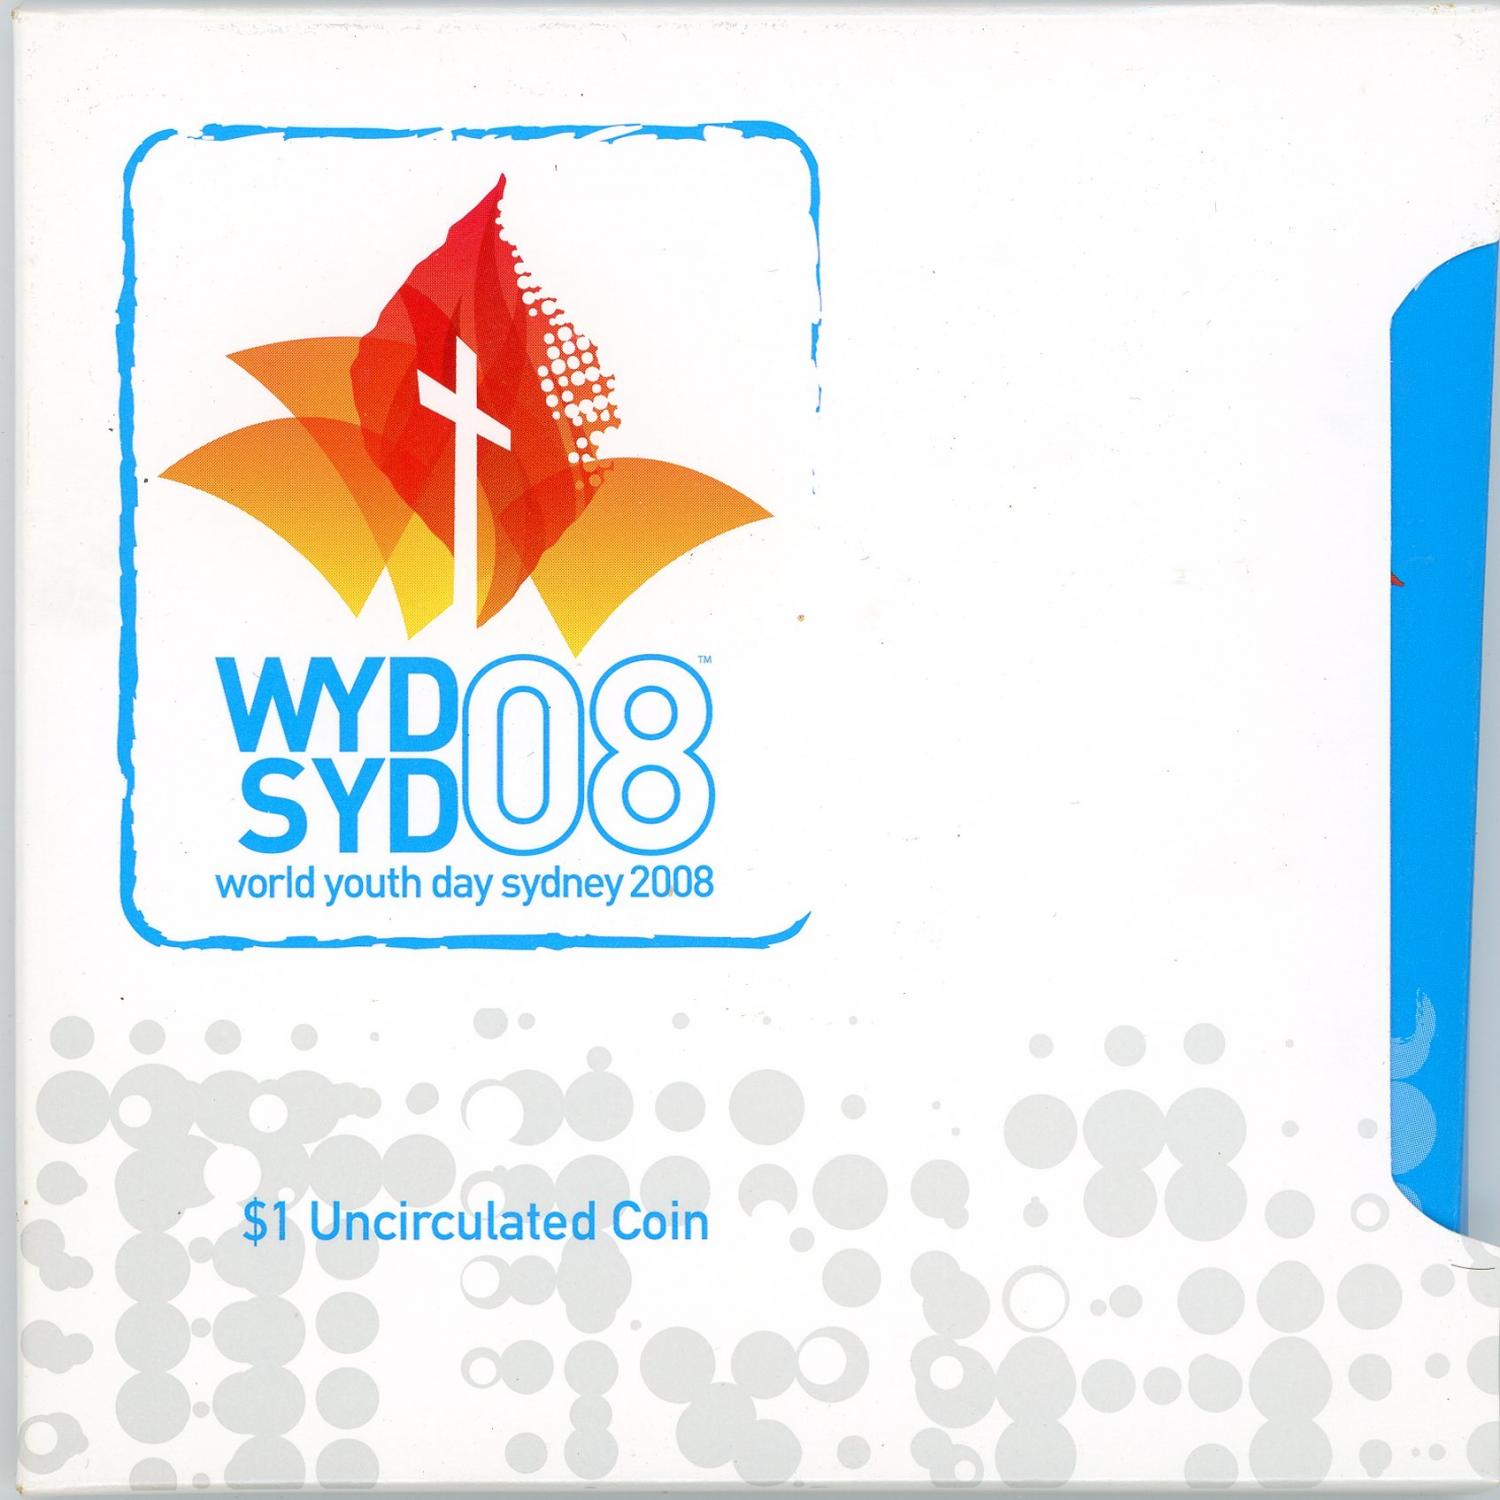 Thumbnail for 2008 $1 Uncirculated Coin - World Youth Day Sydney